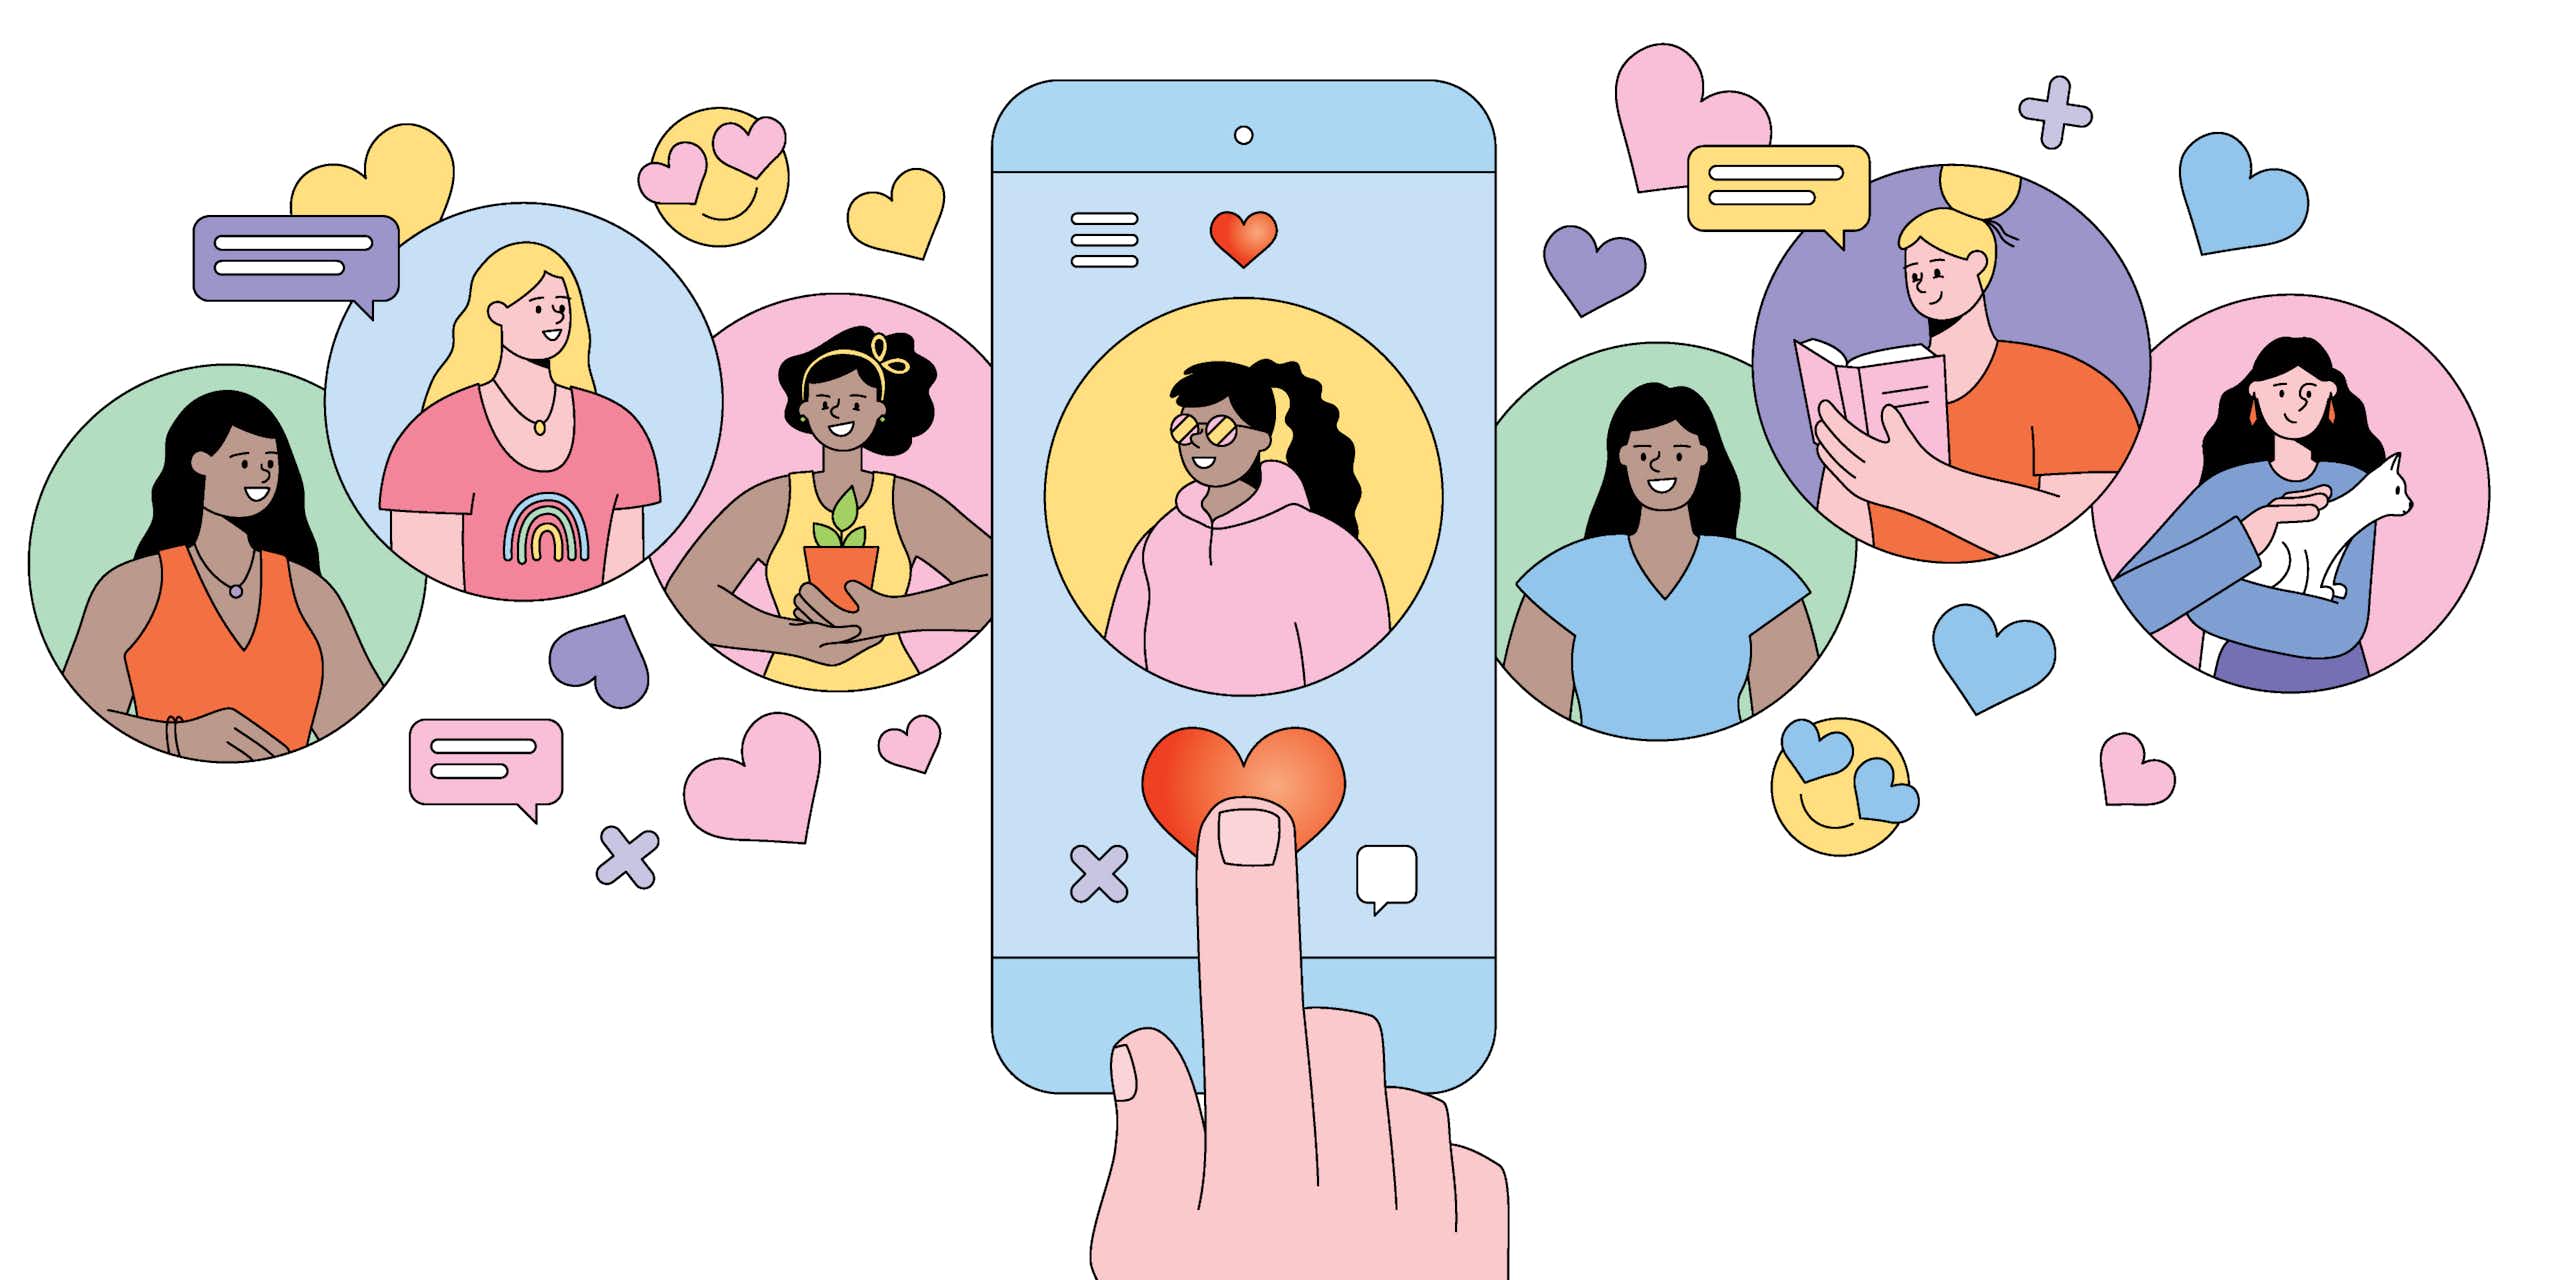 A cartoon with pastel colors shows a hand touching a heart on a phone with an image of a girl with brown skin. There are other circles and hearts also showing cartoon images of women with different colored hair and skin.